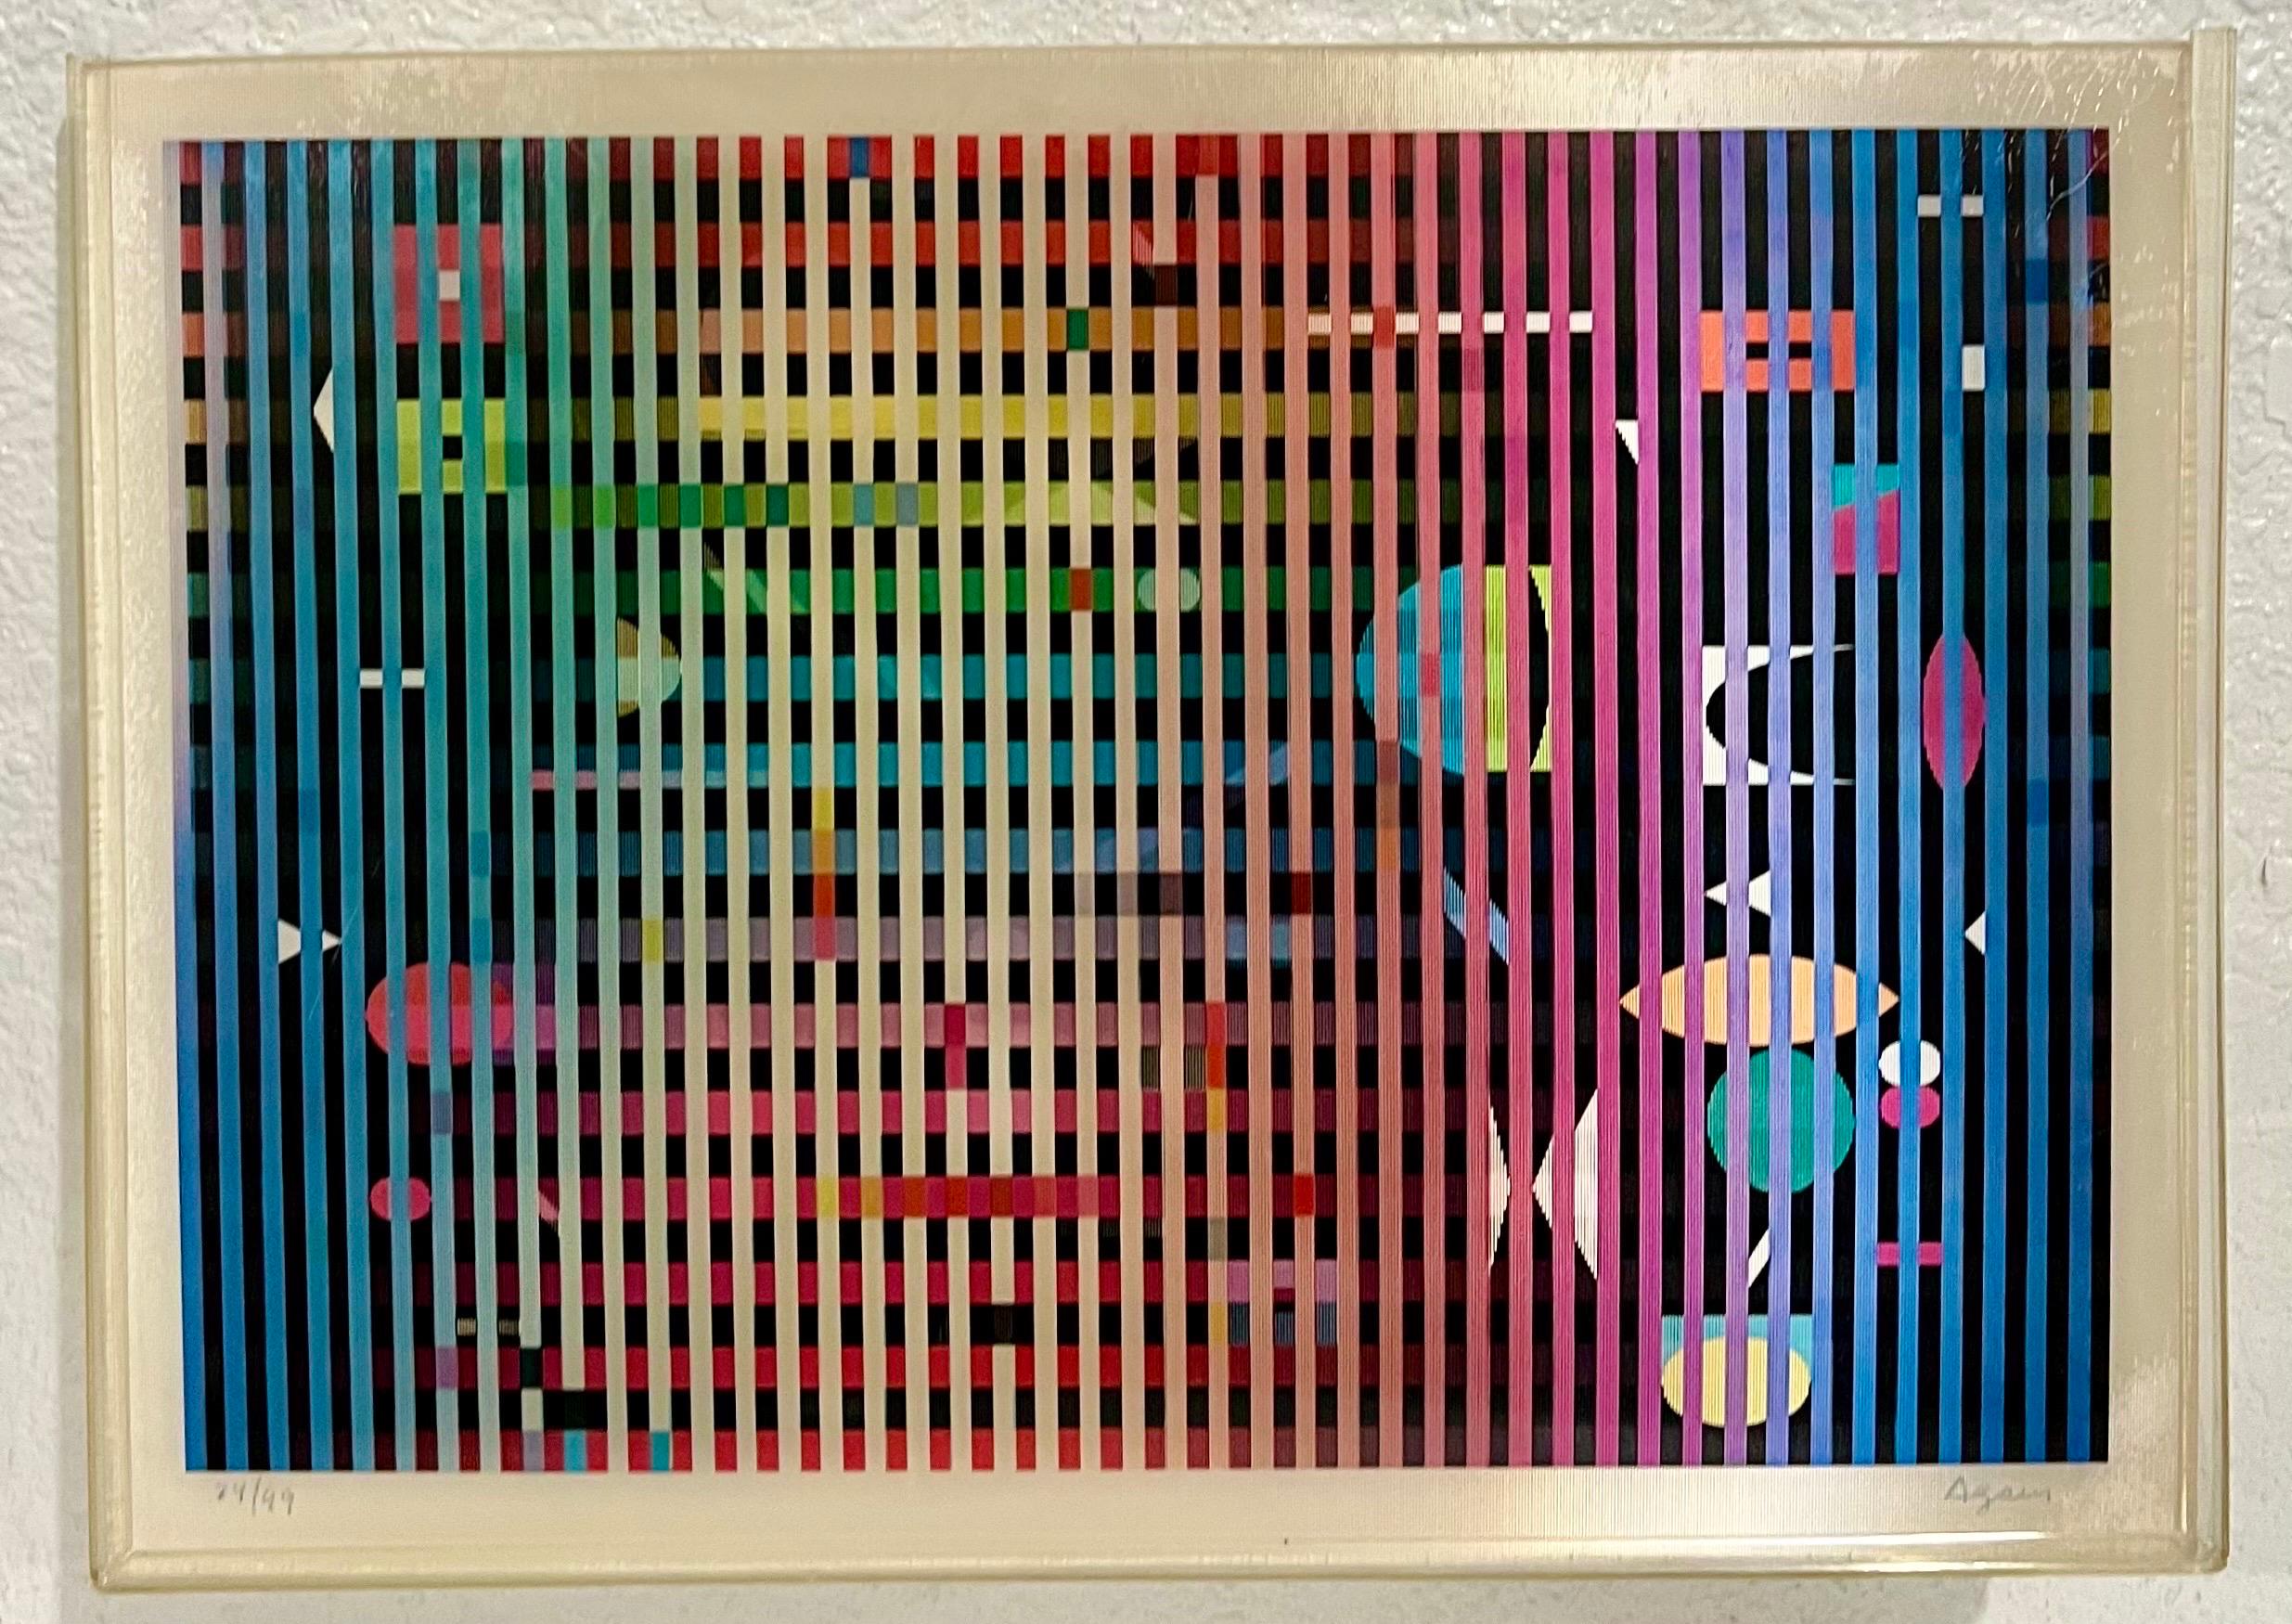 What style of art did Yaacov Agam create?